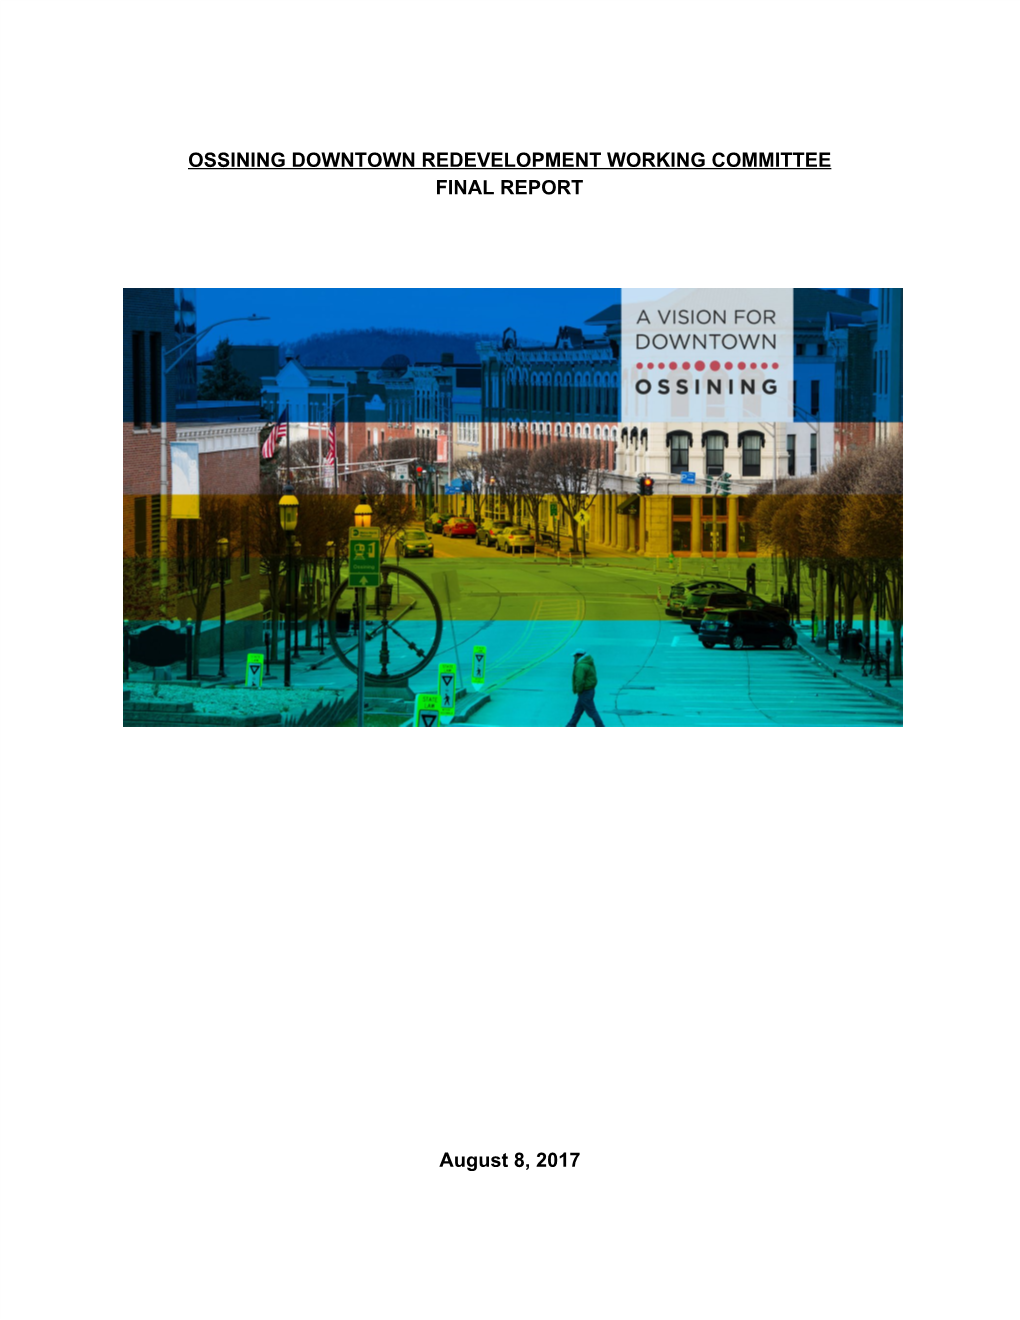 Ossining Downtown Redevelopment Working Committee Final Report